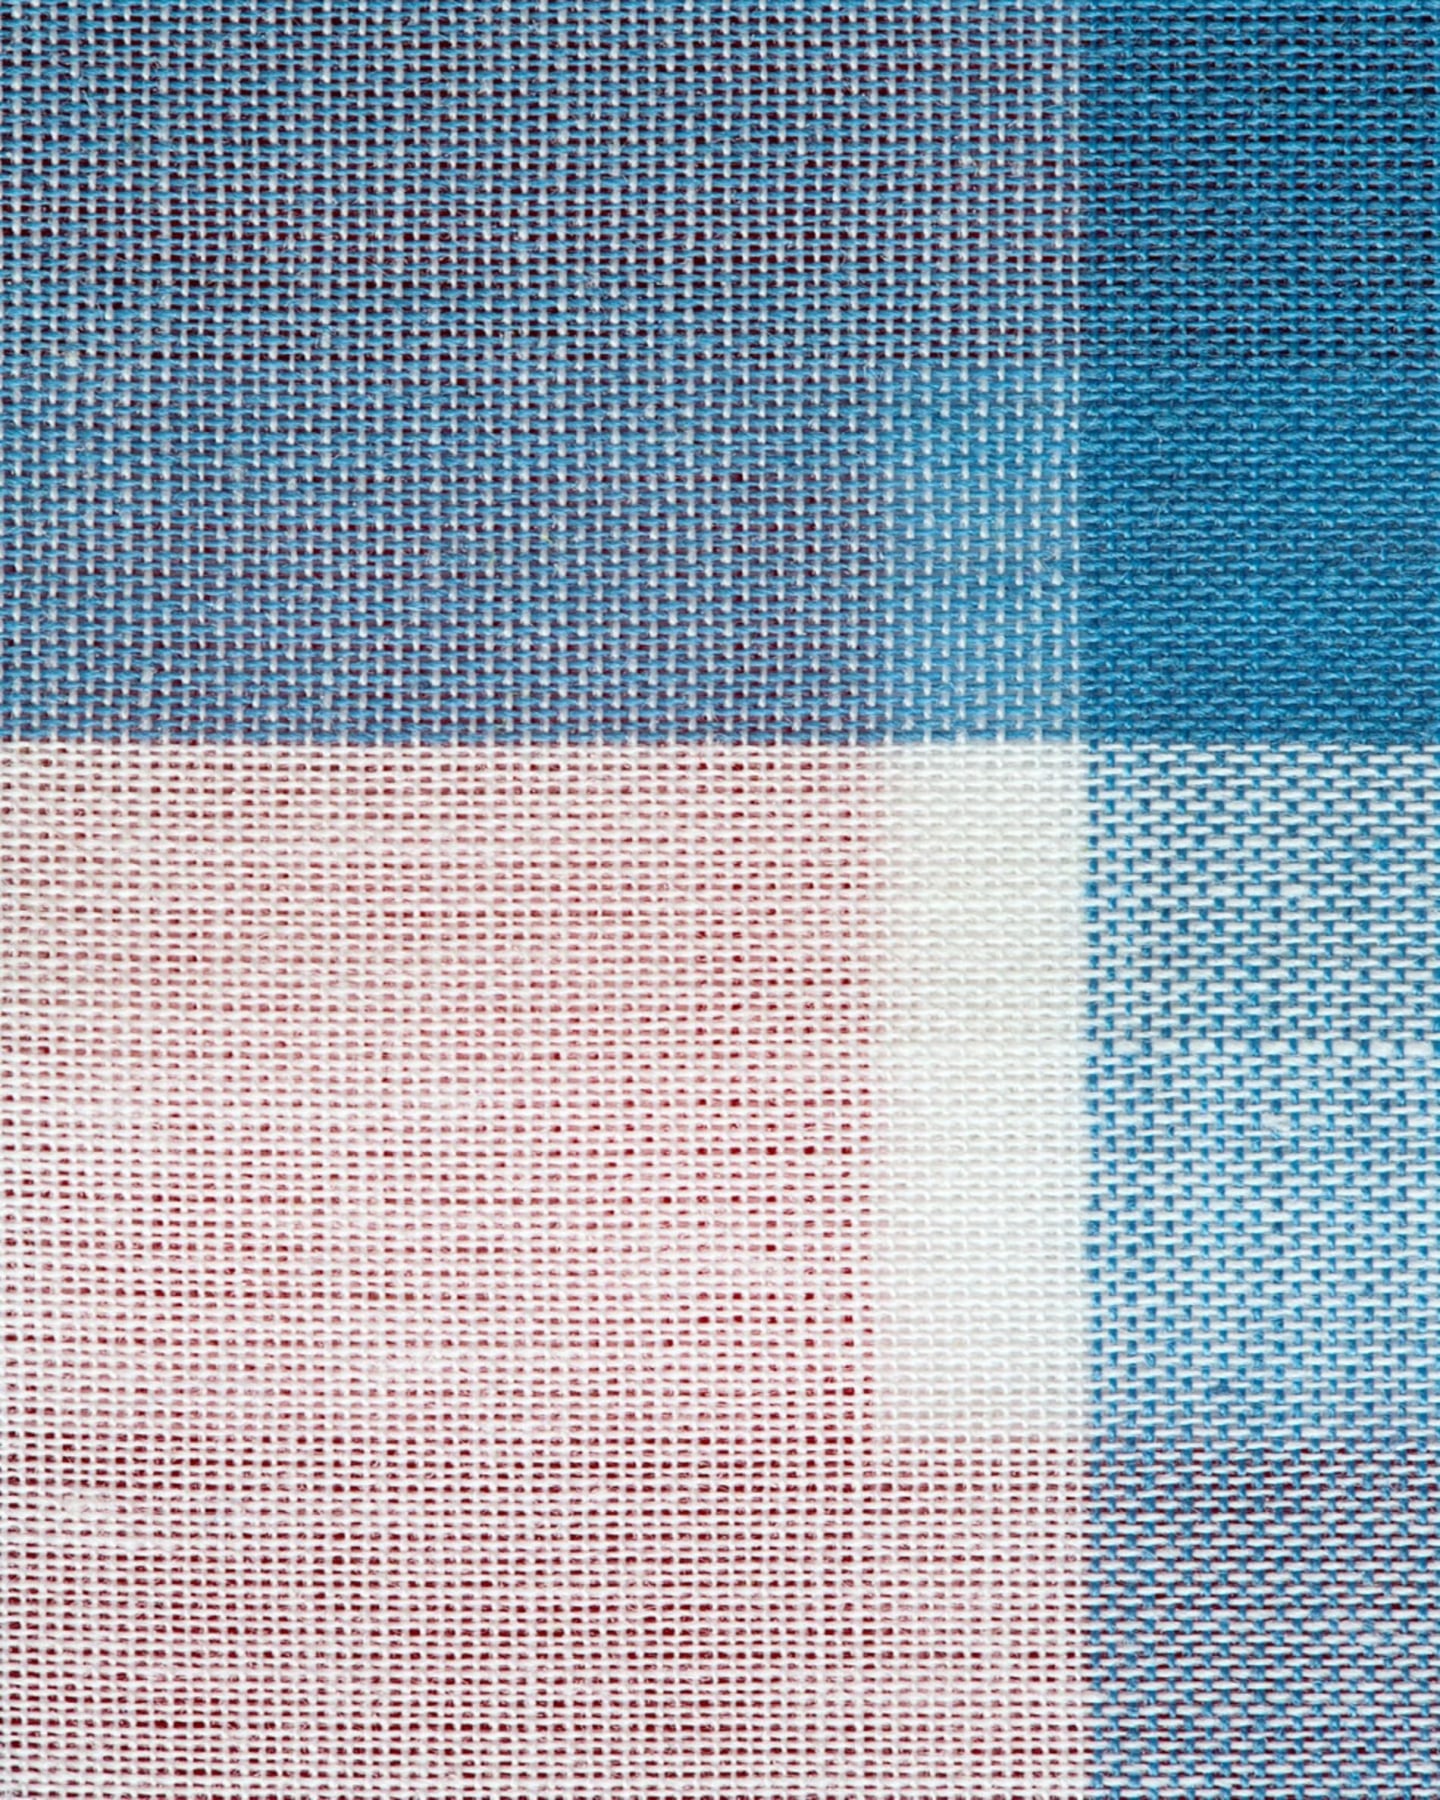 pink, blue, and white gingham pattern